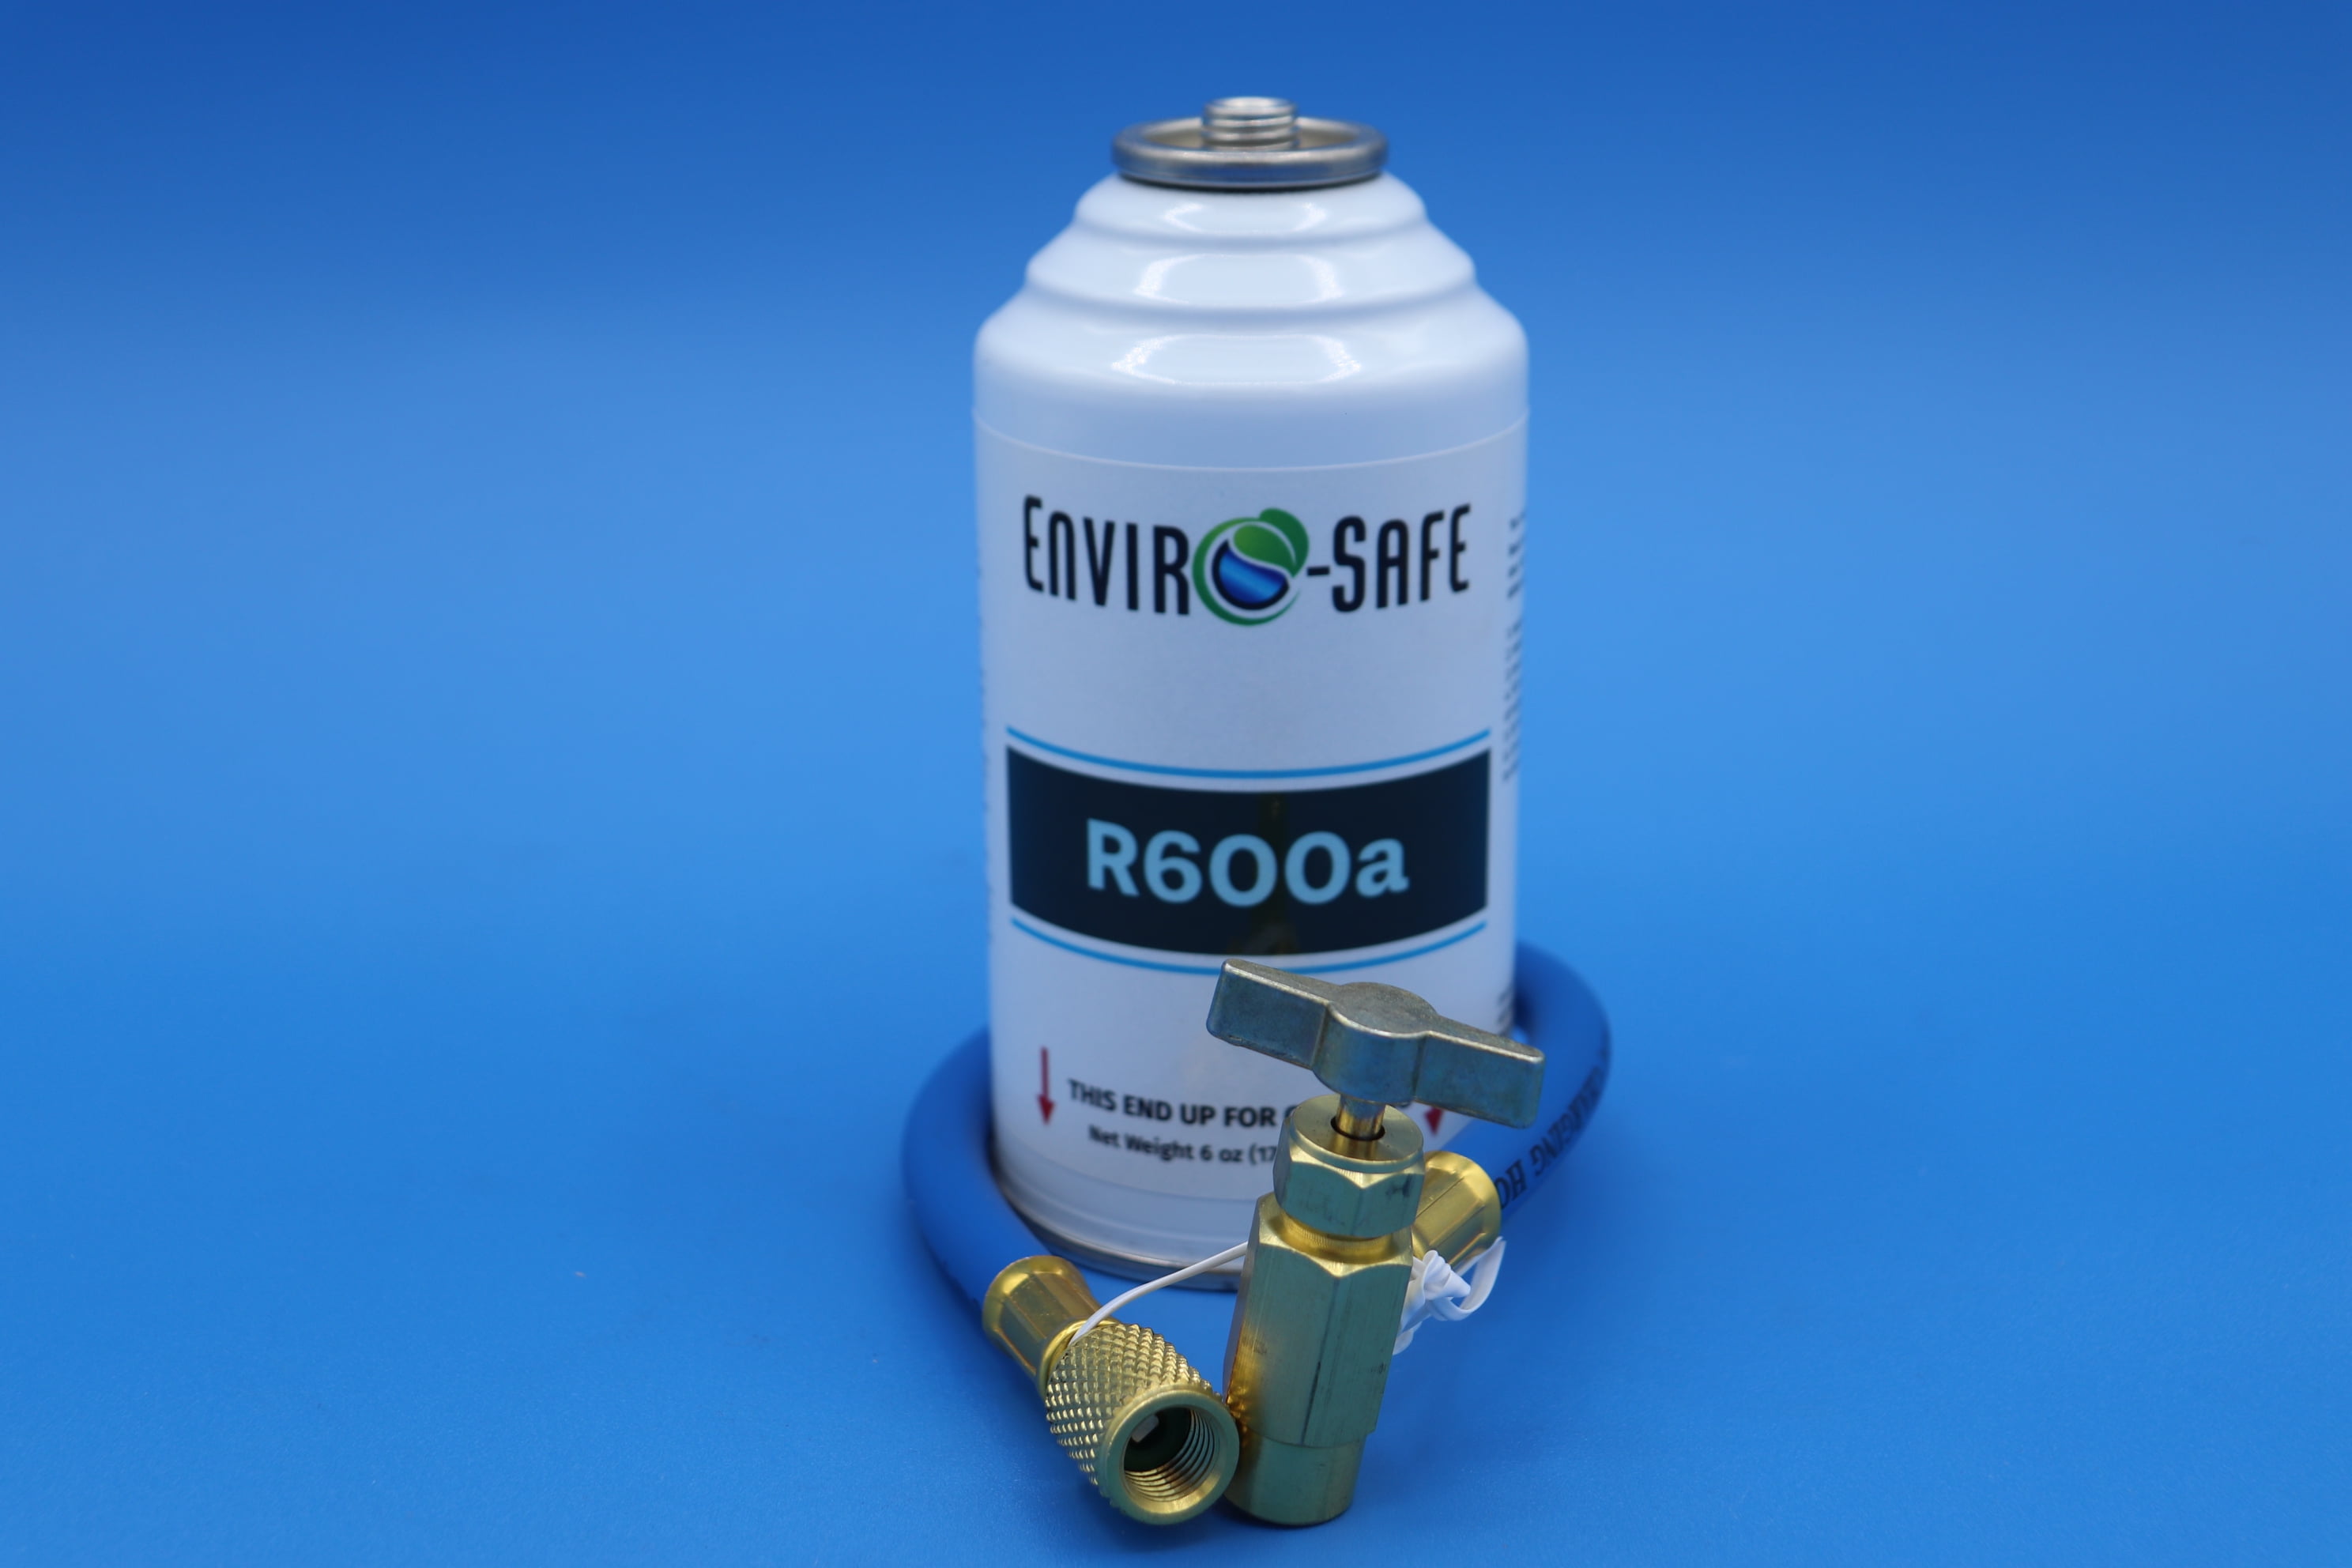 Refrigerant R600a Upright Charging Self Sealing Can 6oz - 3 Pack